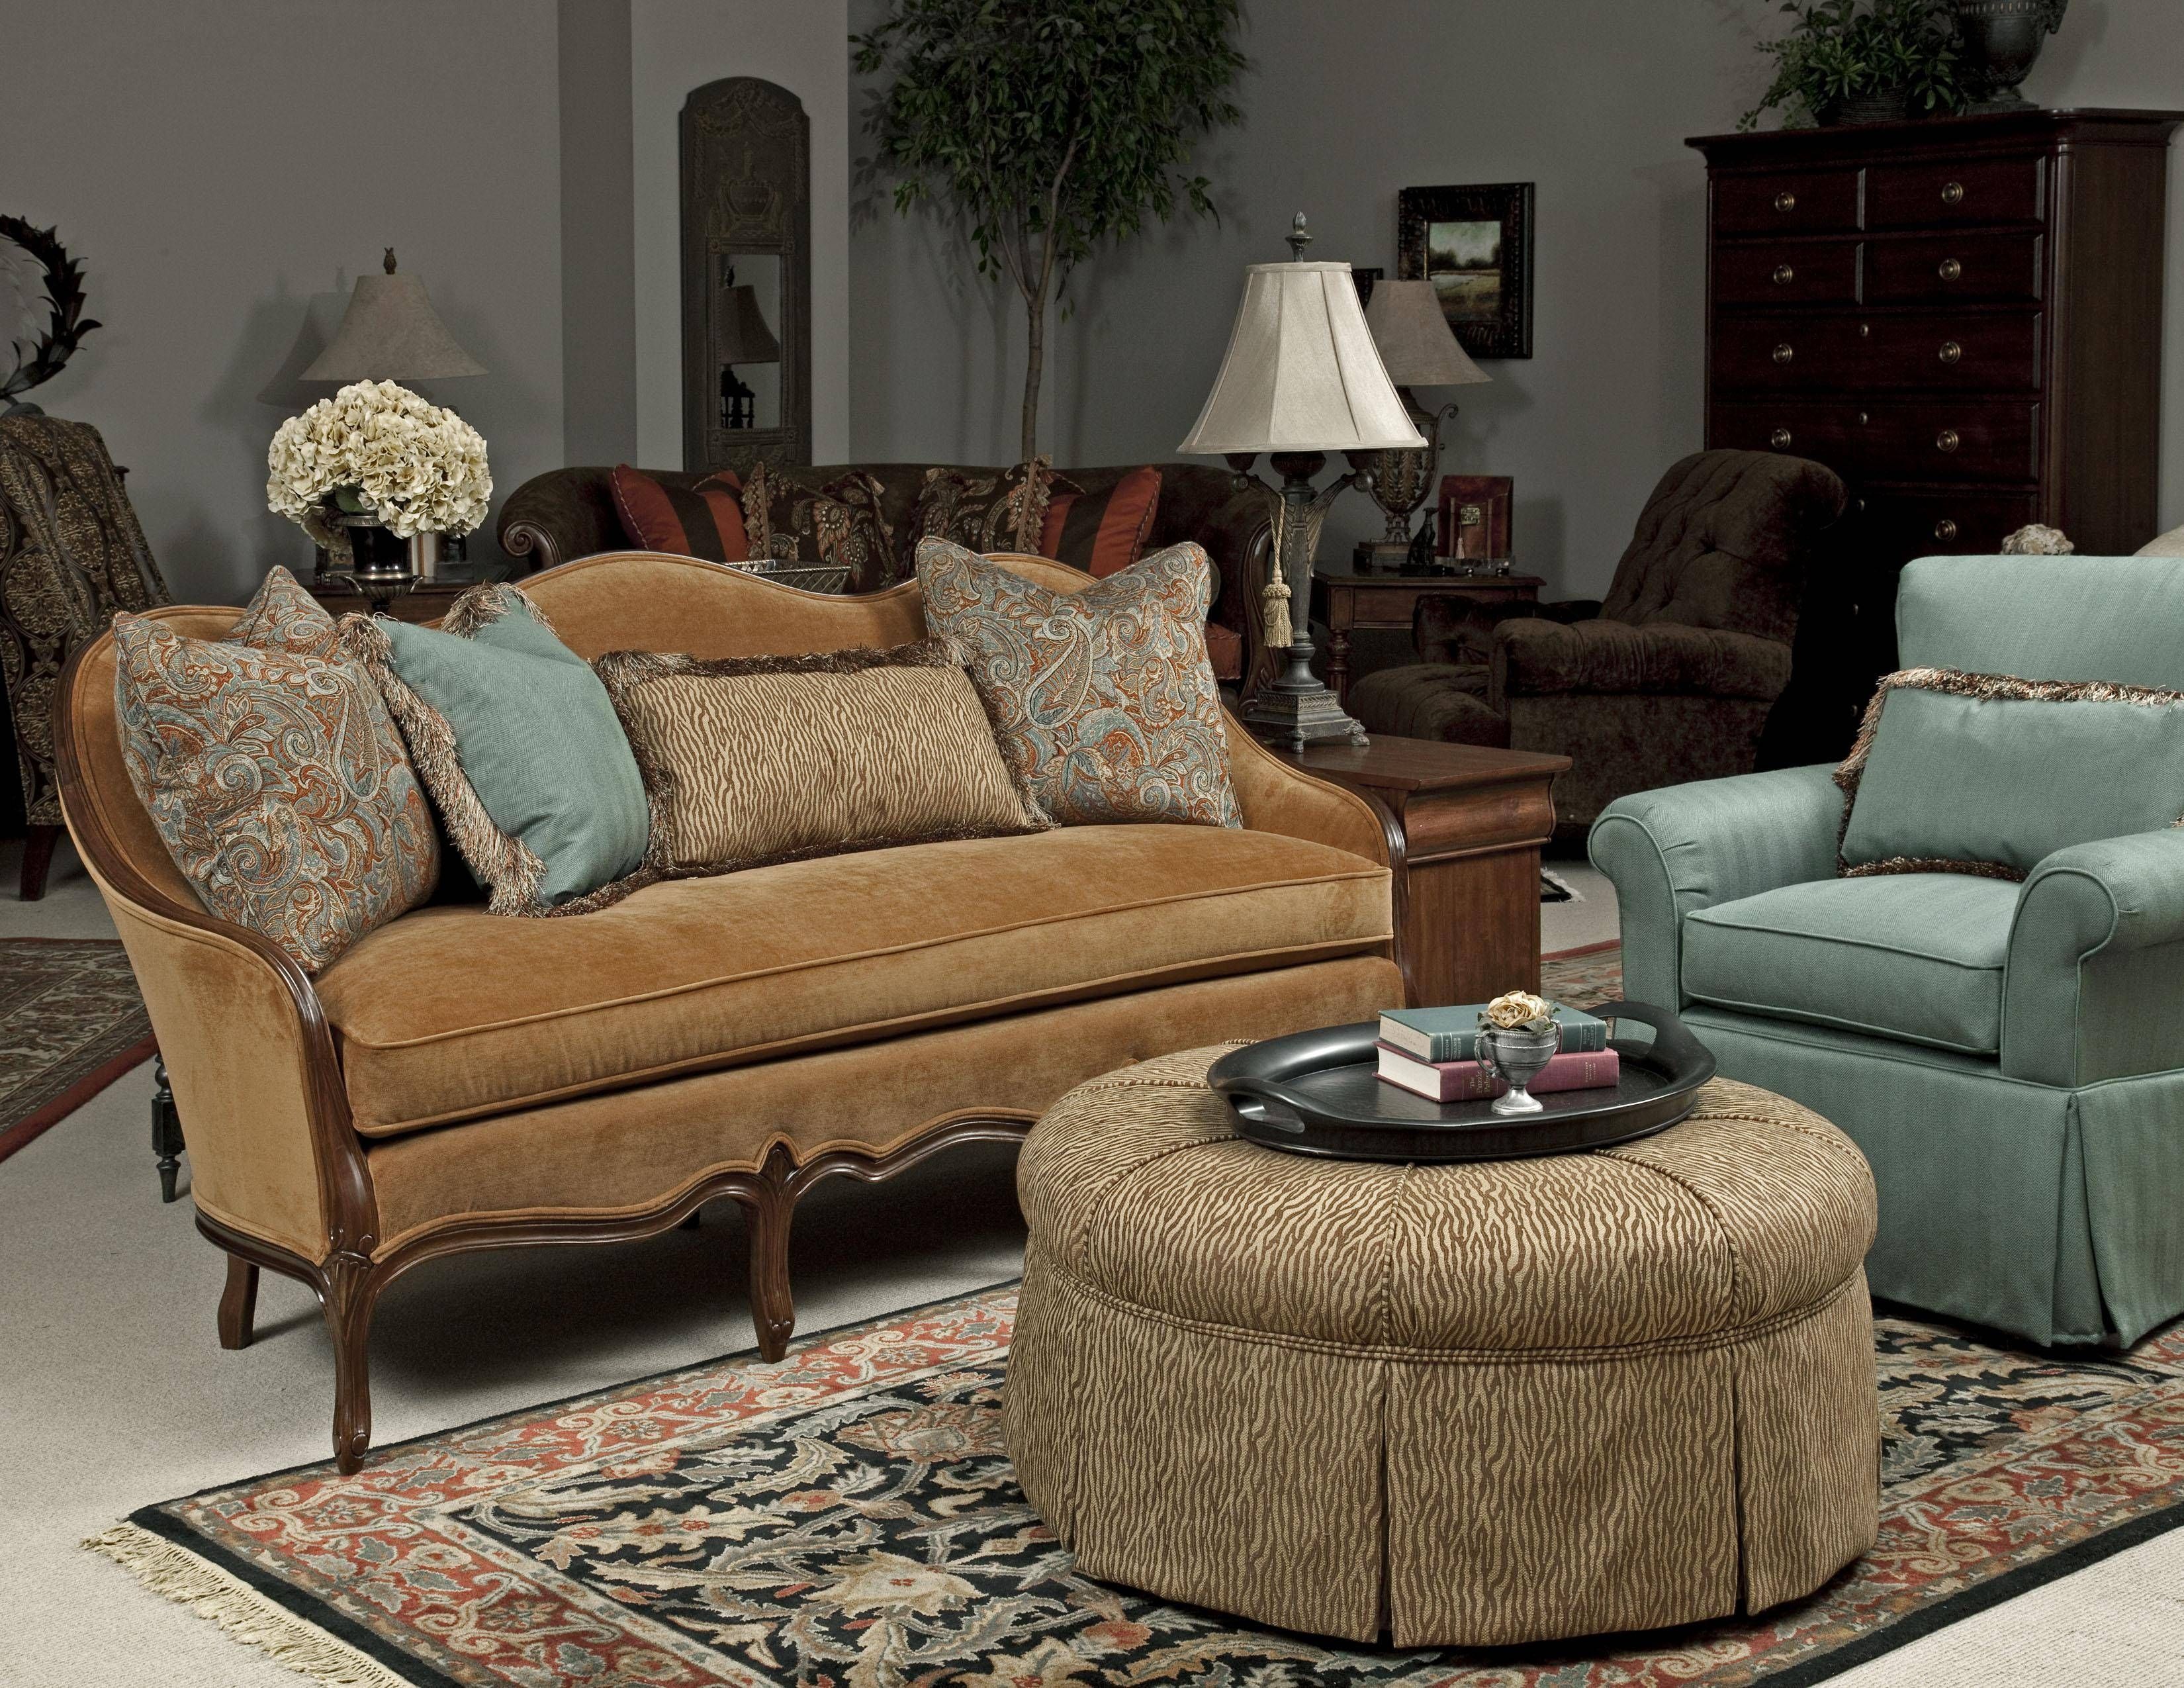 Traditional French Sofa With Exposed Wood Camel Back And Loose Pertaining To Camel Color Sofas (View 1 of 15)